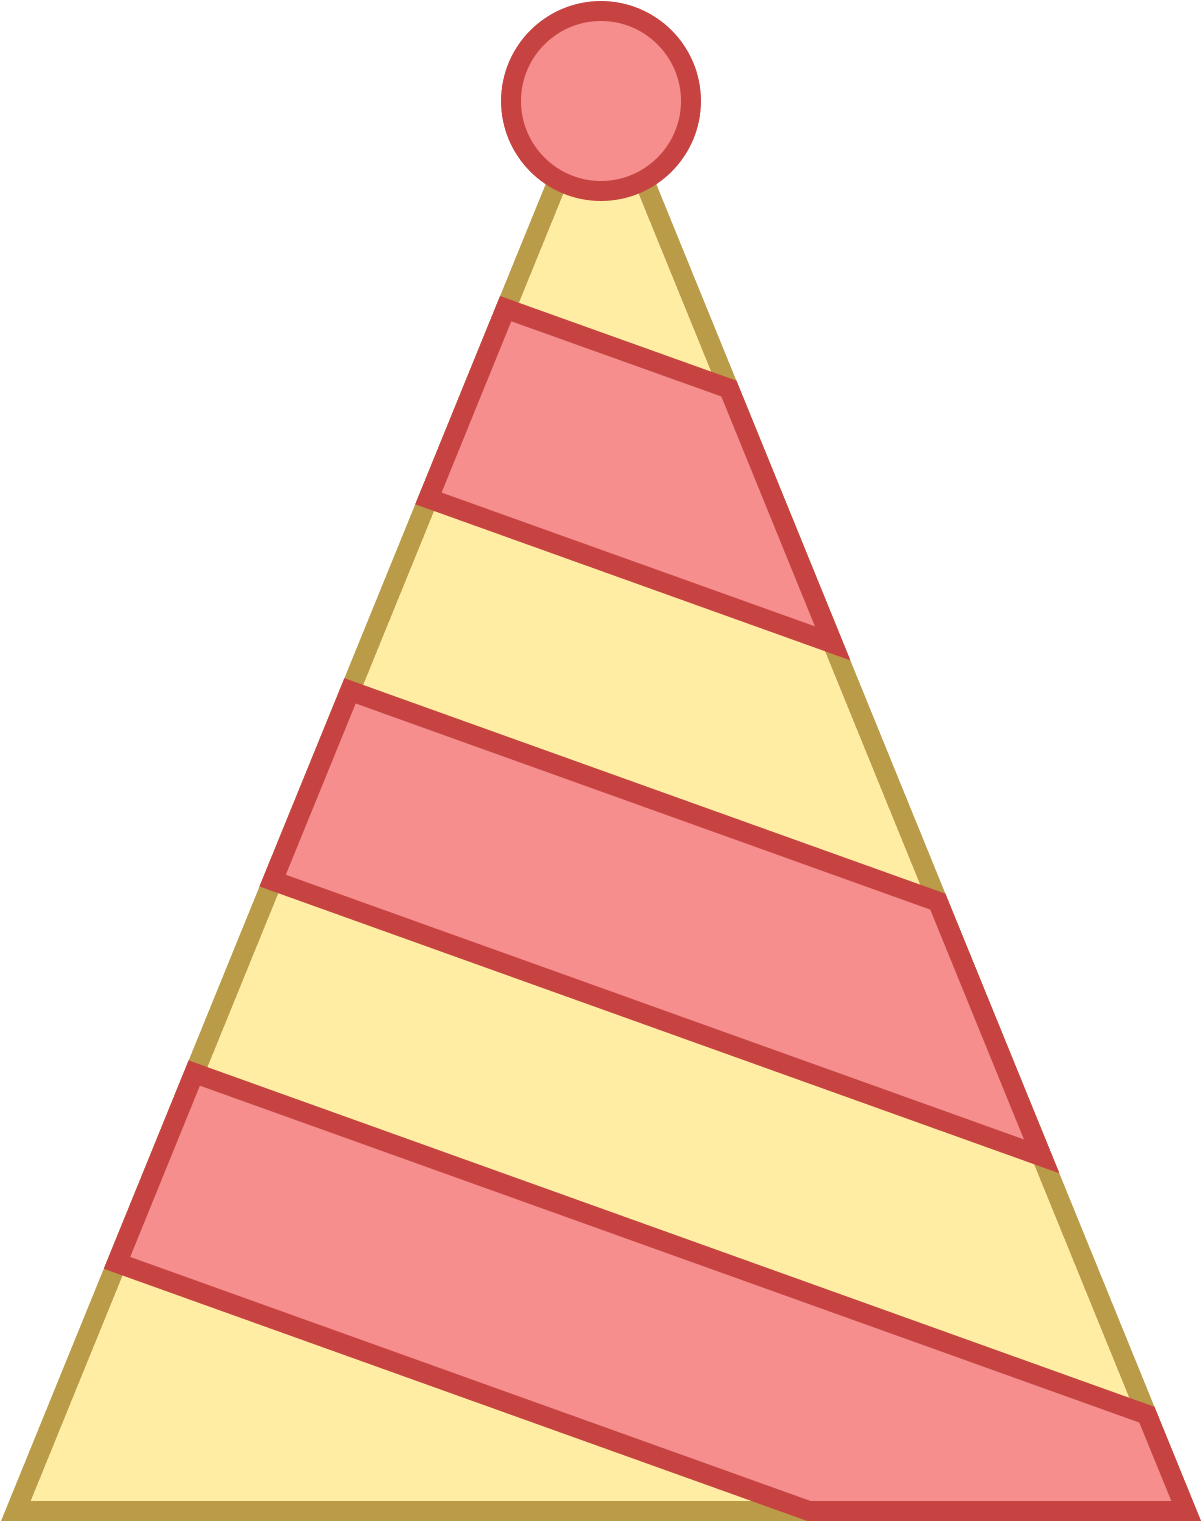 Hat Clipart Triangle - Triangle Party Hat Clipart (1600x1600)